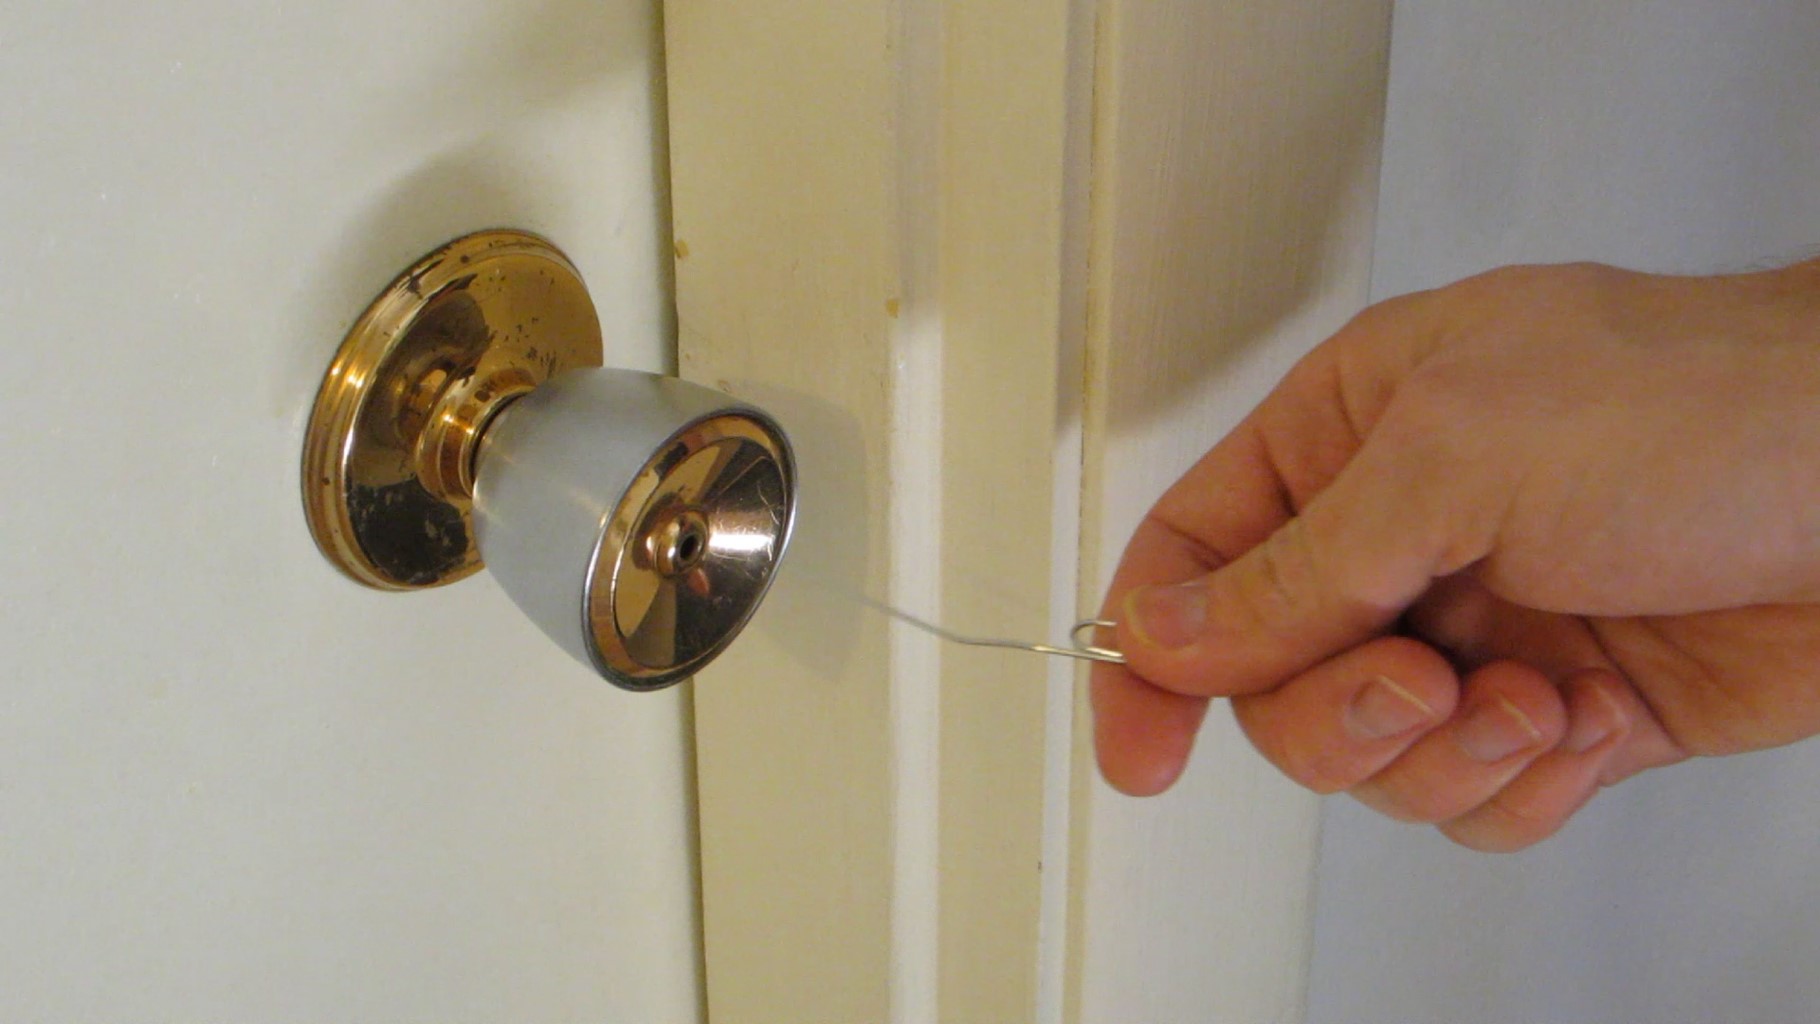 How To Pick A Lock On A Door With A Paperclip